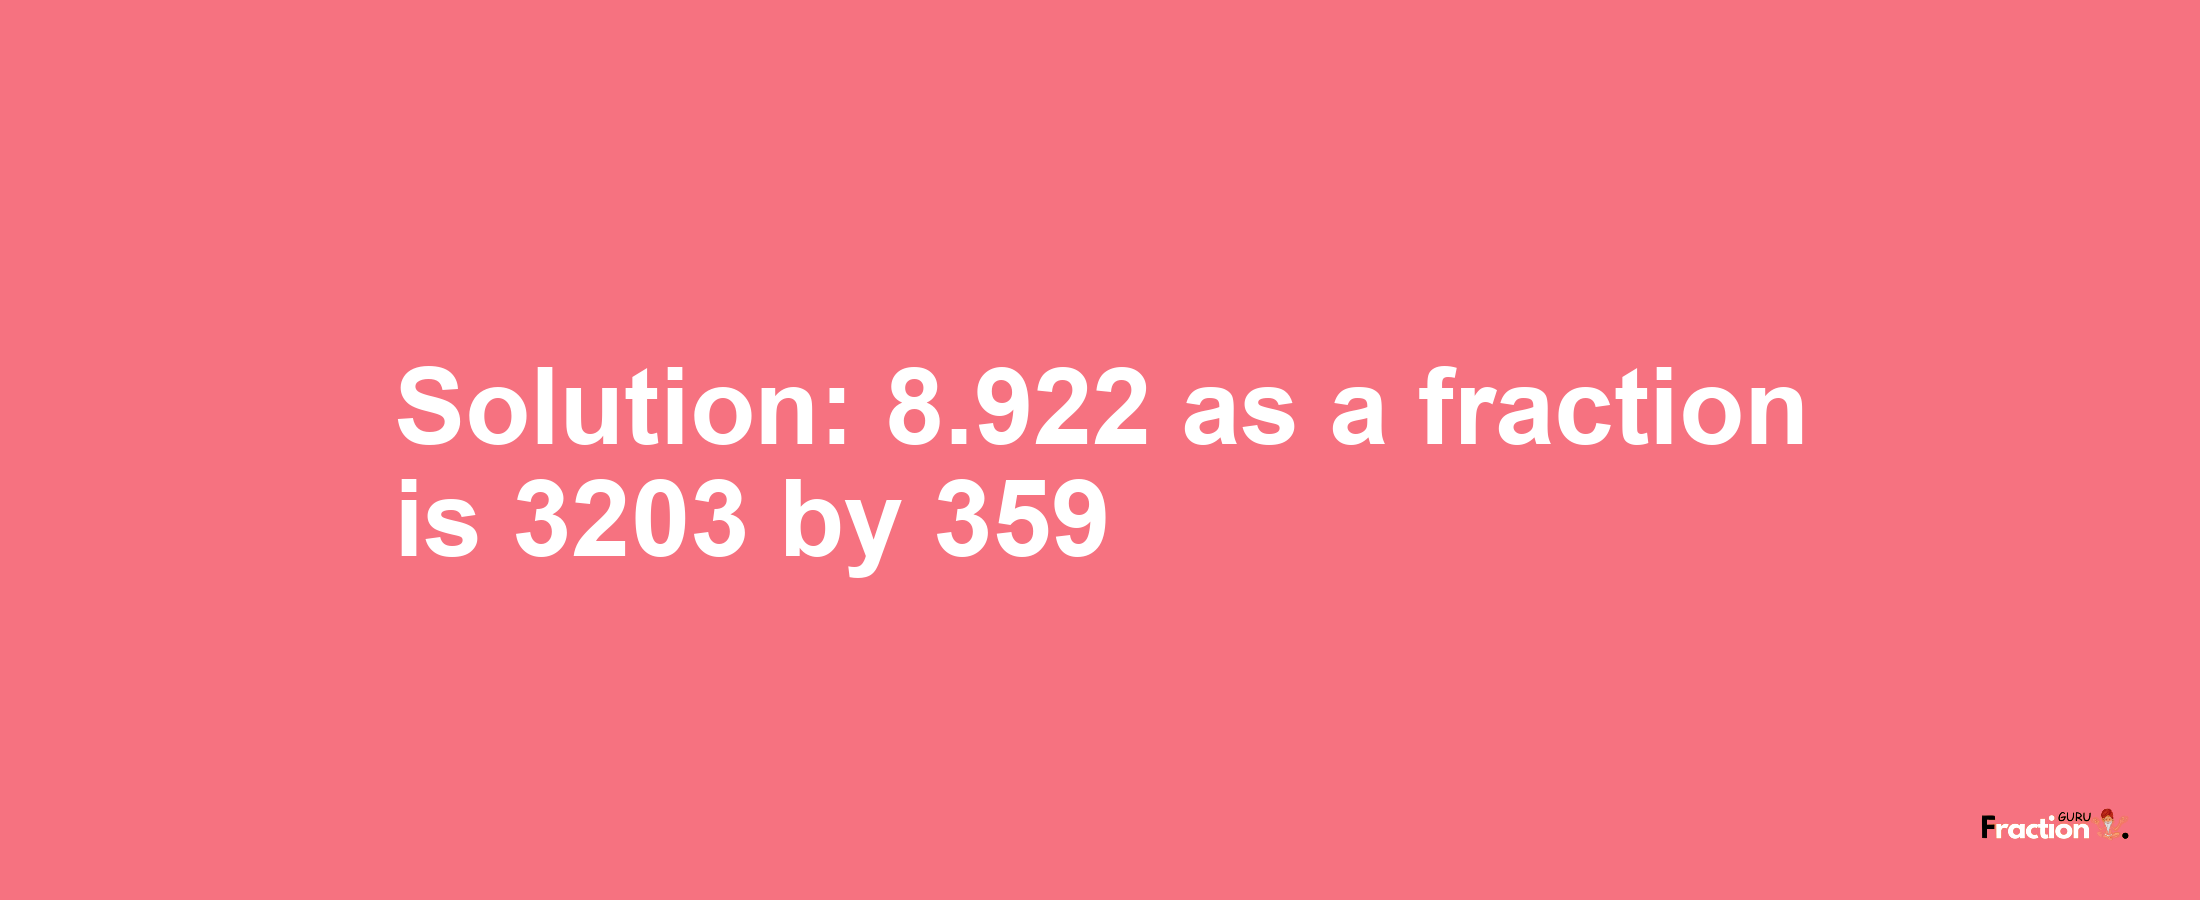 Solution:8.922 as a fraction is 3203/359